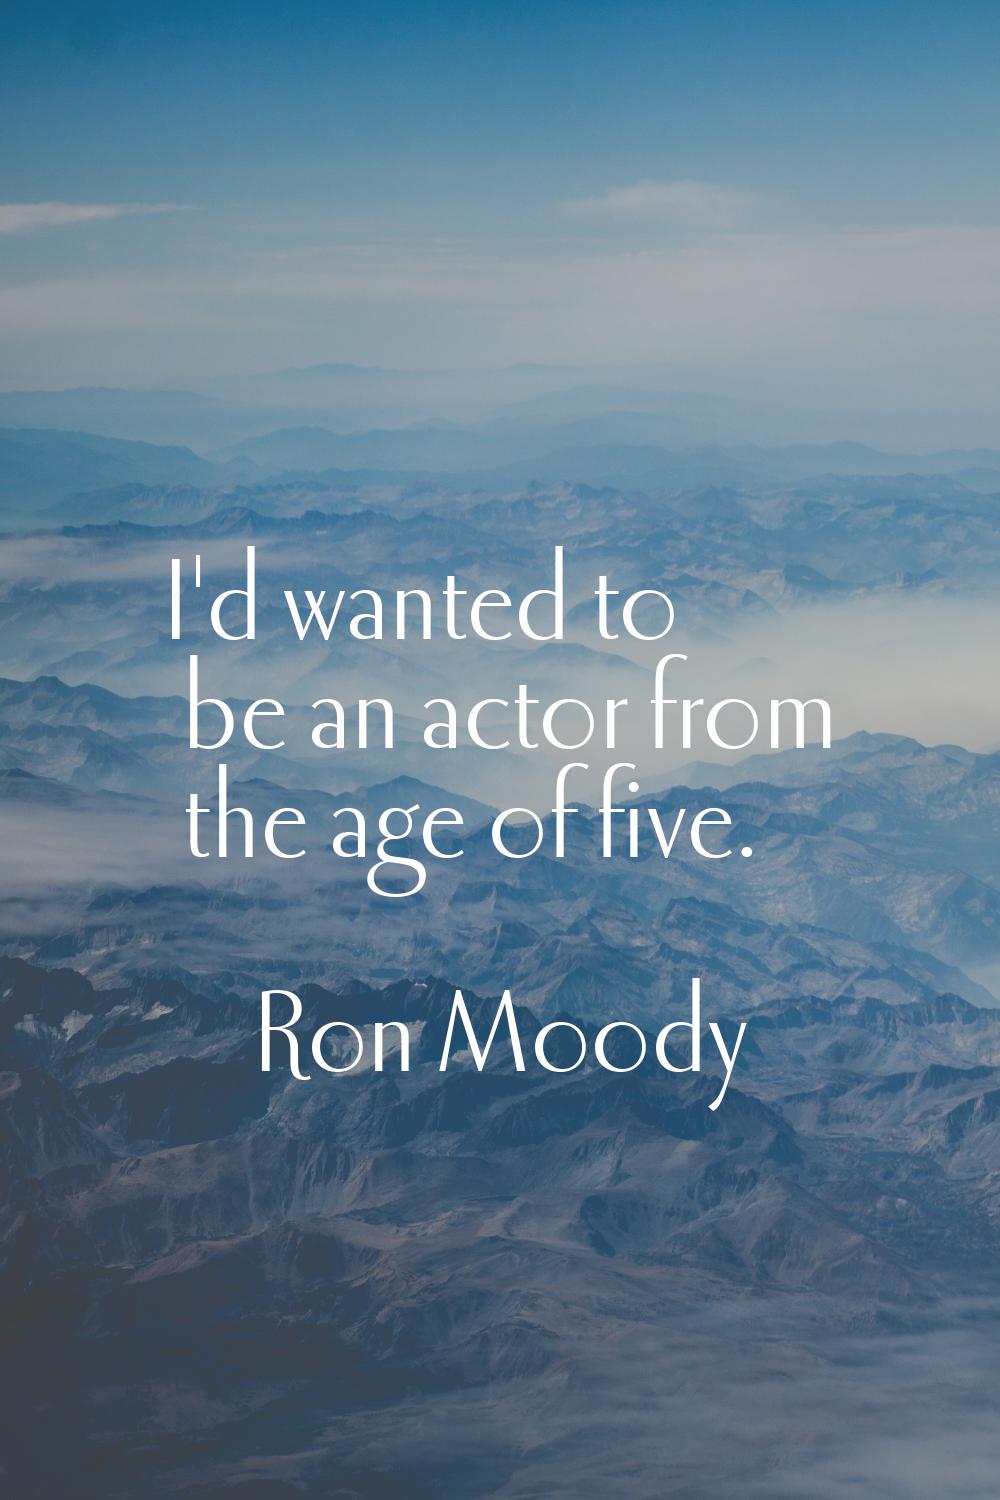 I'd wanted to be an actor from the age of five.